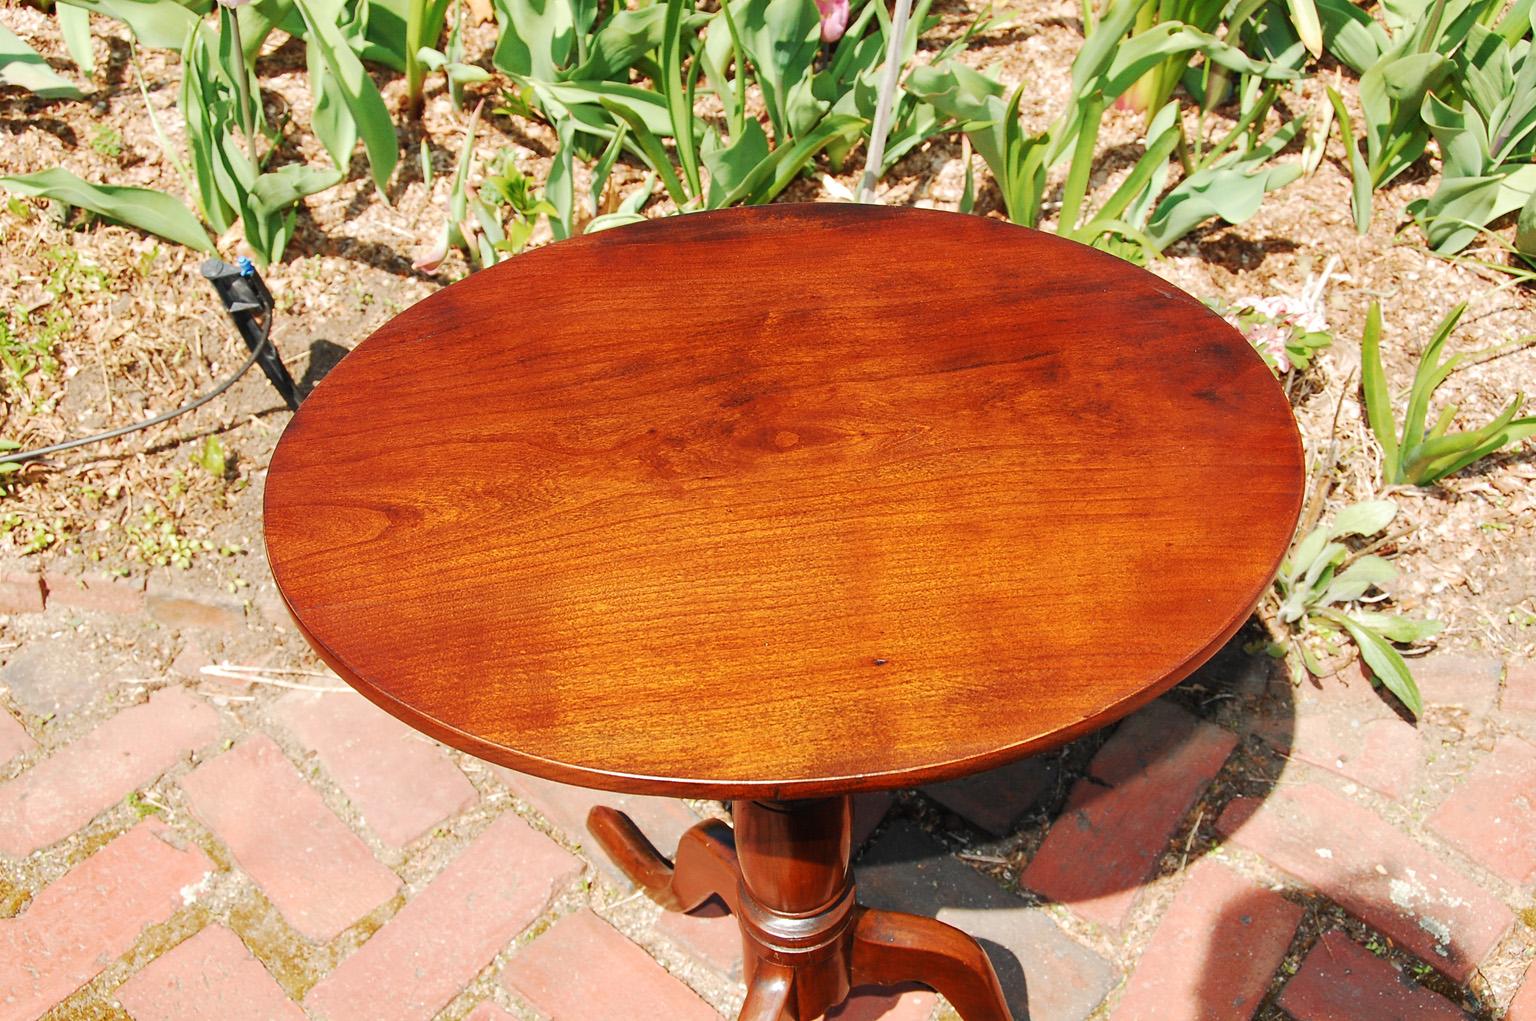 Chippendale American 18th Century Oval Salem Table, Maker's Initials SP: Samuel Phippen